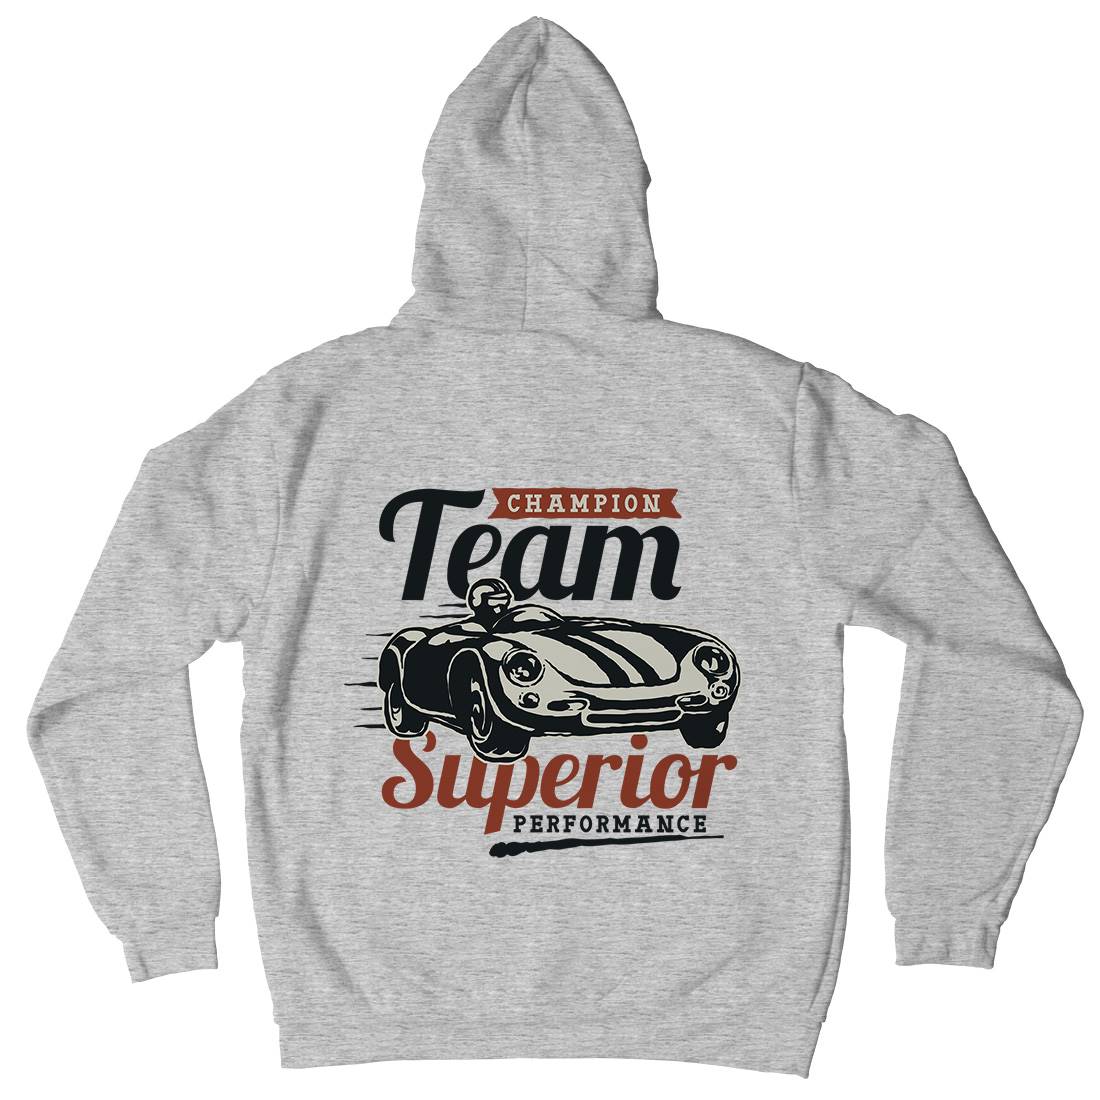 Vintage Racer Champion Mens Hoodie With Pocket Cars A492